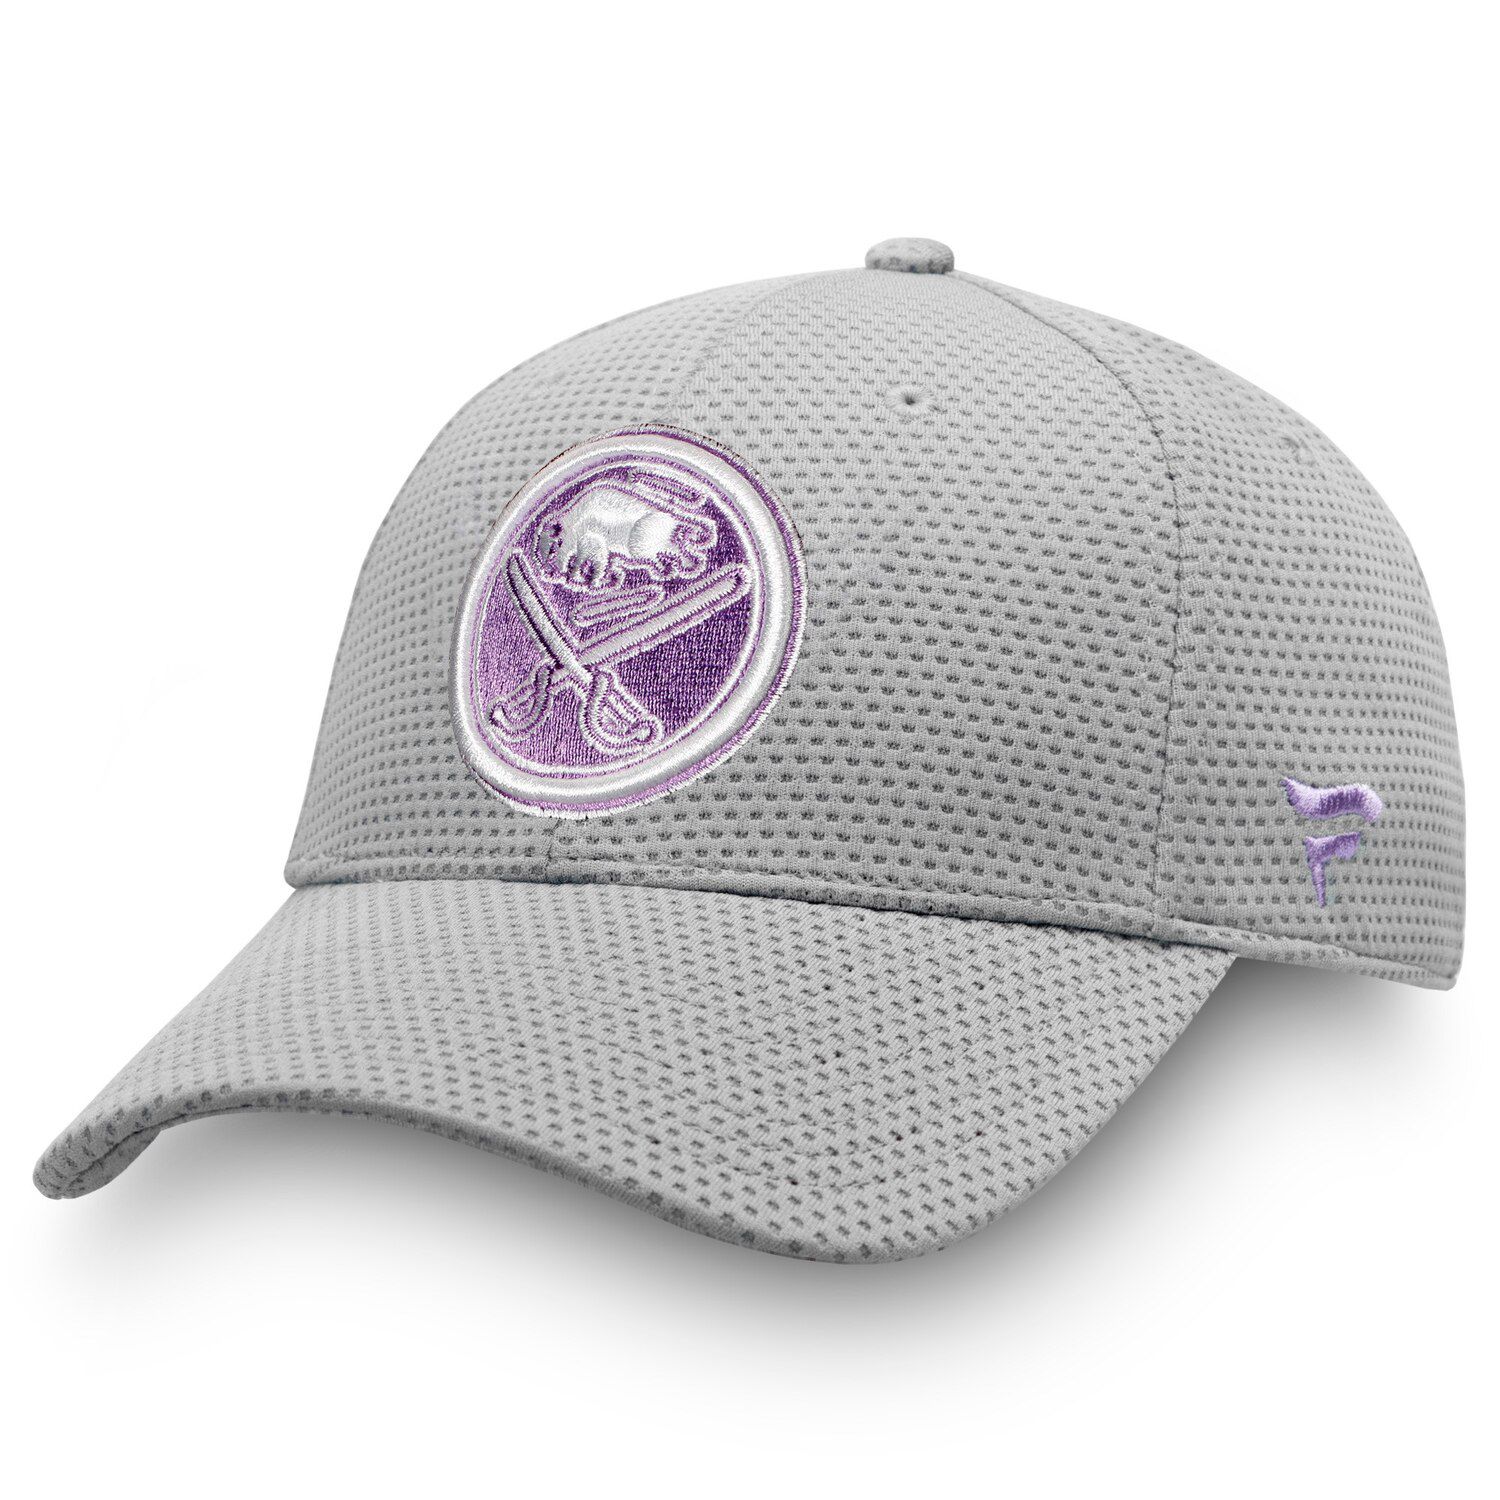 nhl fights cancer hats